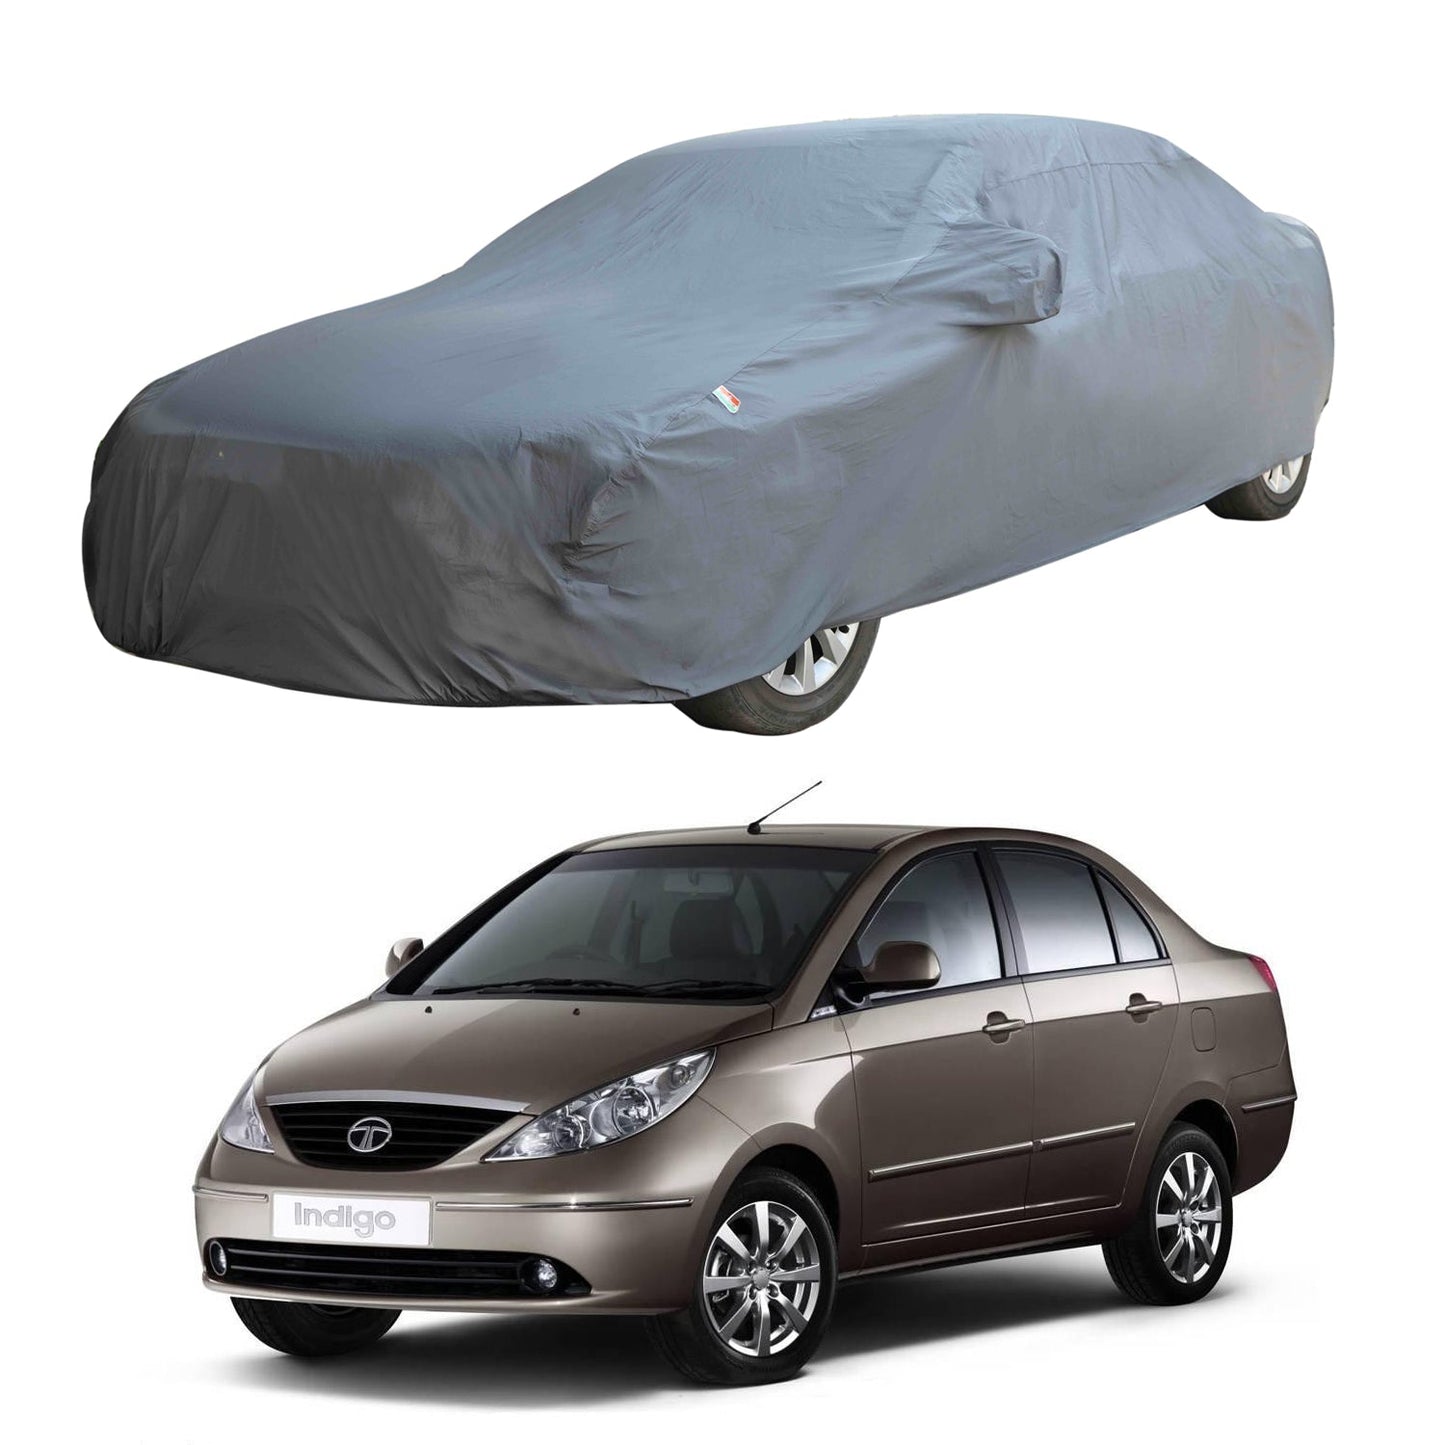 Oshotto Dark Grey 100% Anti Reflective, dustproof and Water Proof Car Body Cover with Mirror Pocket For Tata Indigo